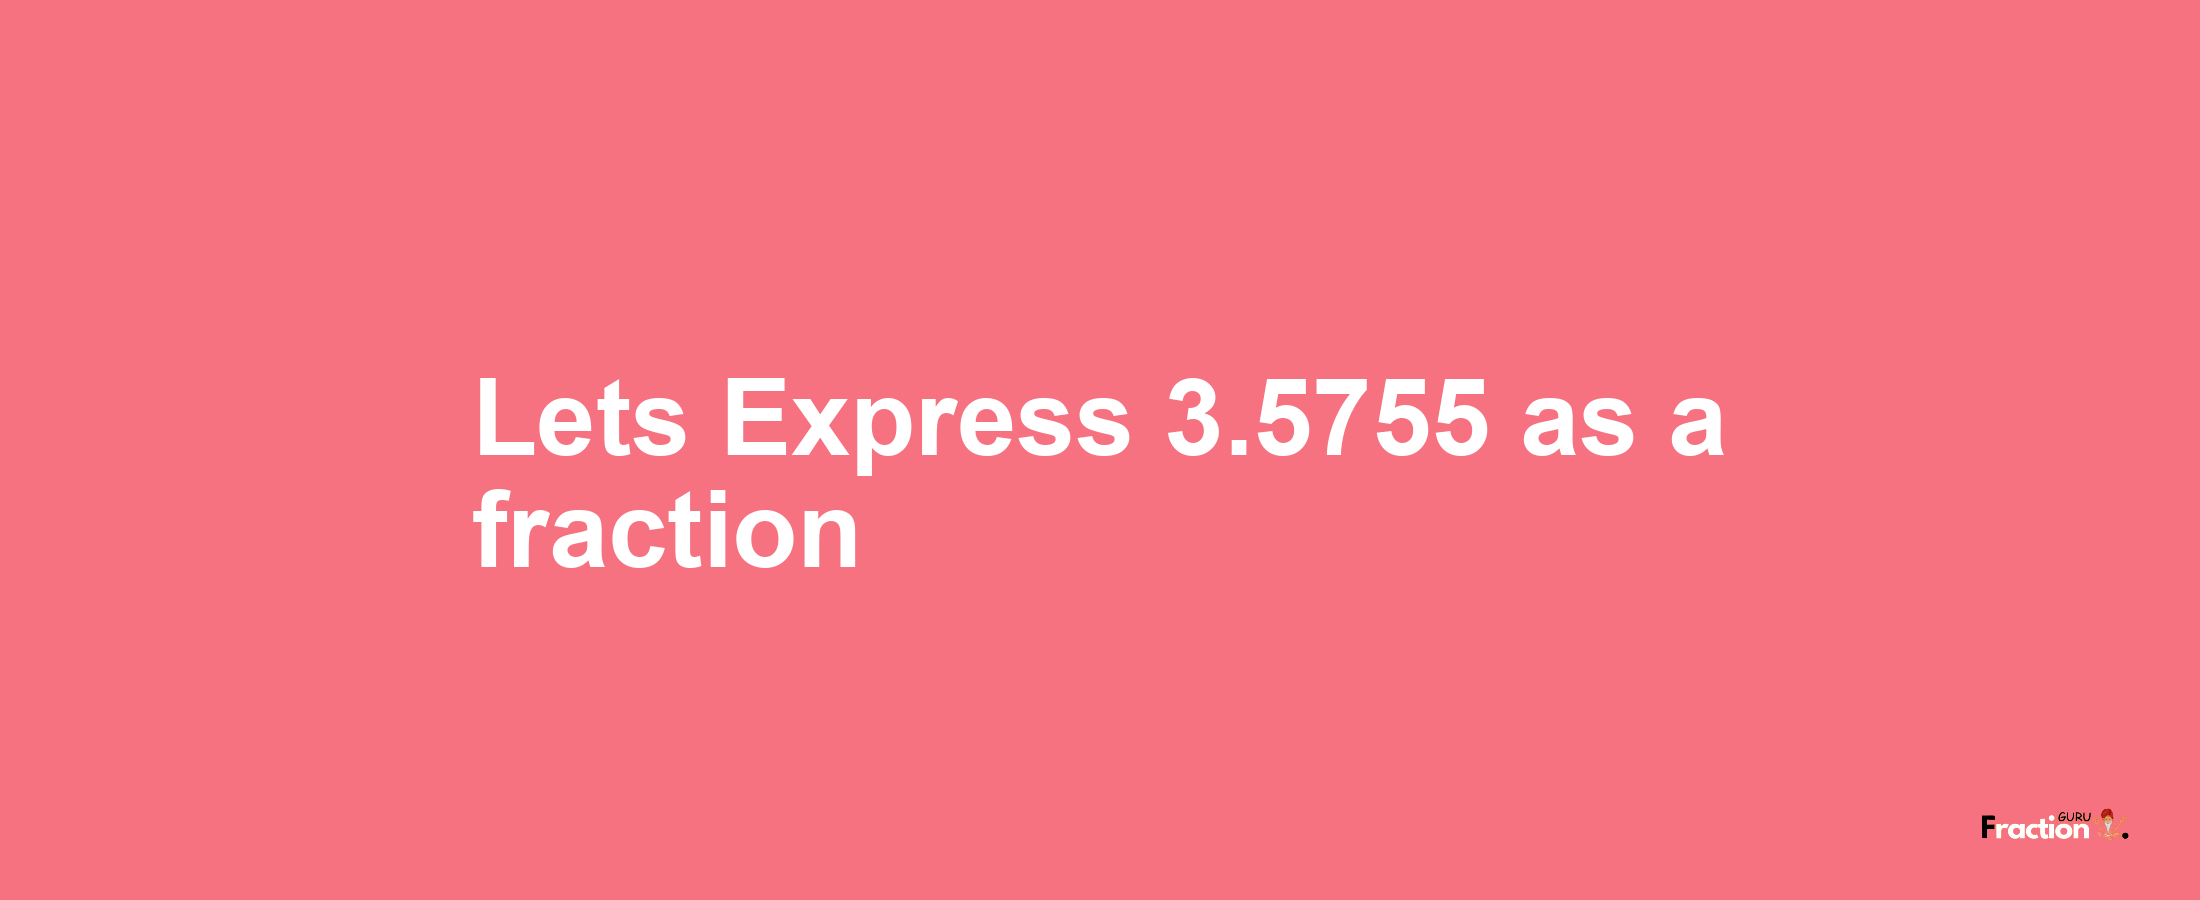 Lets Express 3.5755 as afraction